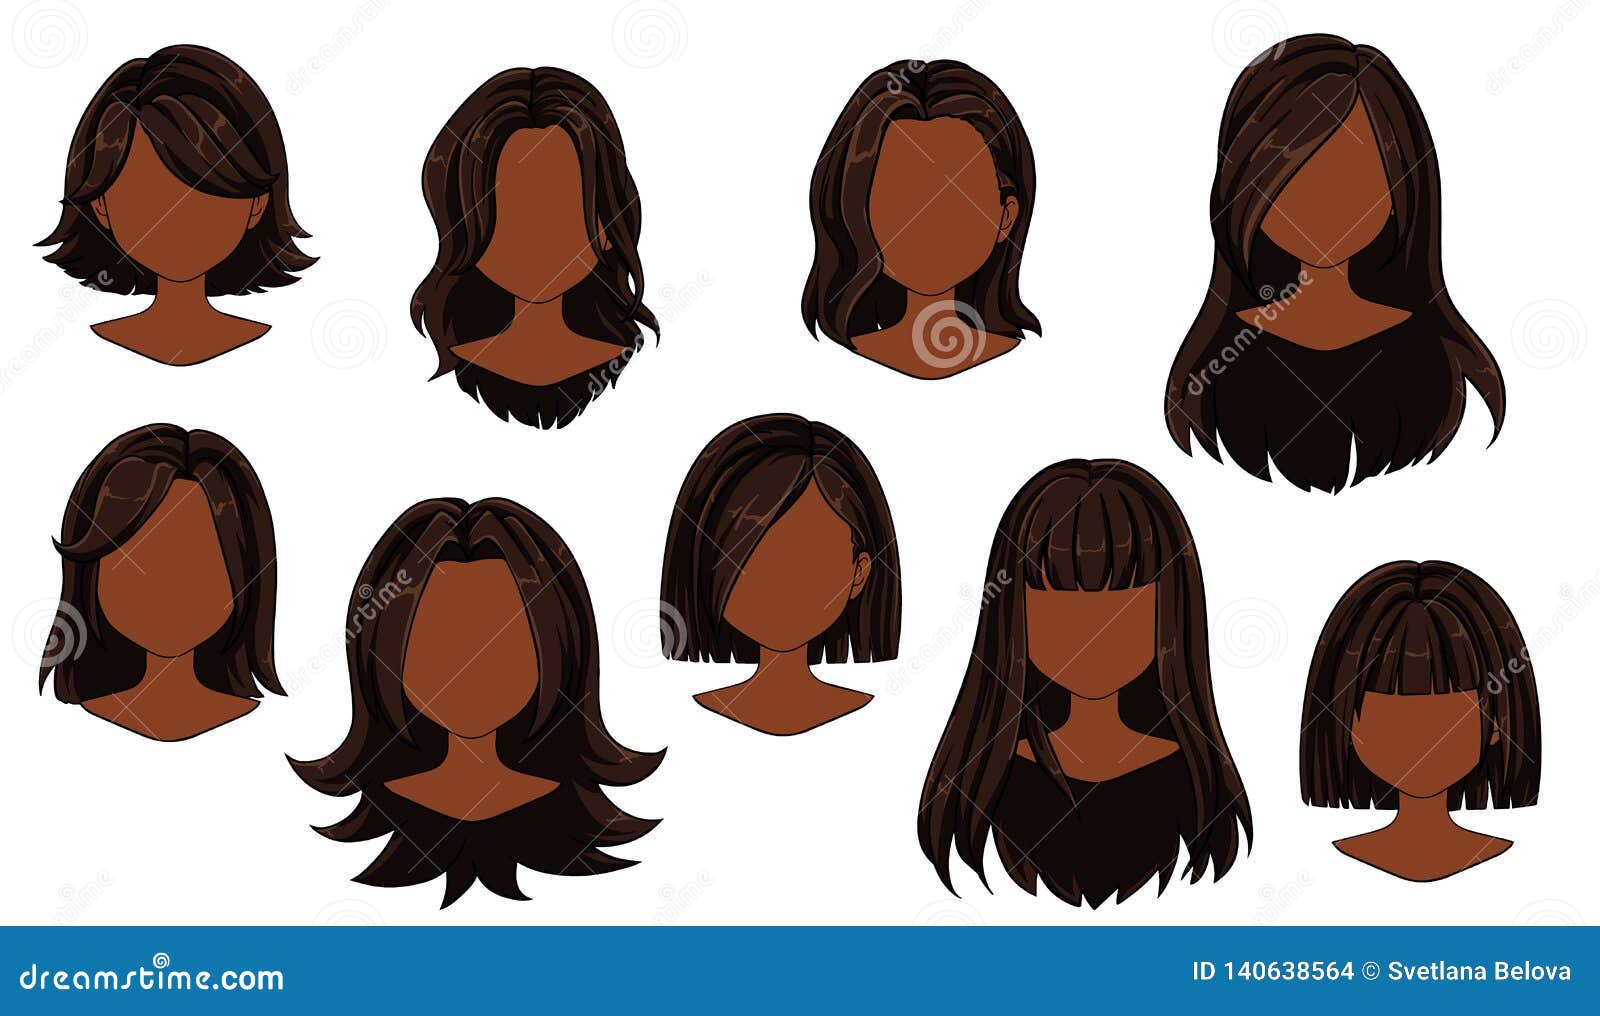 Beautiful Hairstyle Woman Modern Fashion For Assortment Ombre Long Short Hair Curly Hair Salon Hairstyles And Trendy Haircut Stock Vector Illustration Of Adult Female 140638564